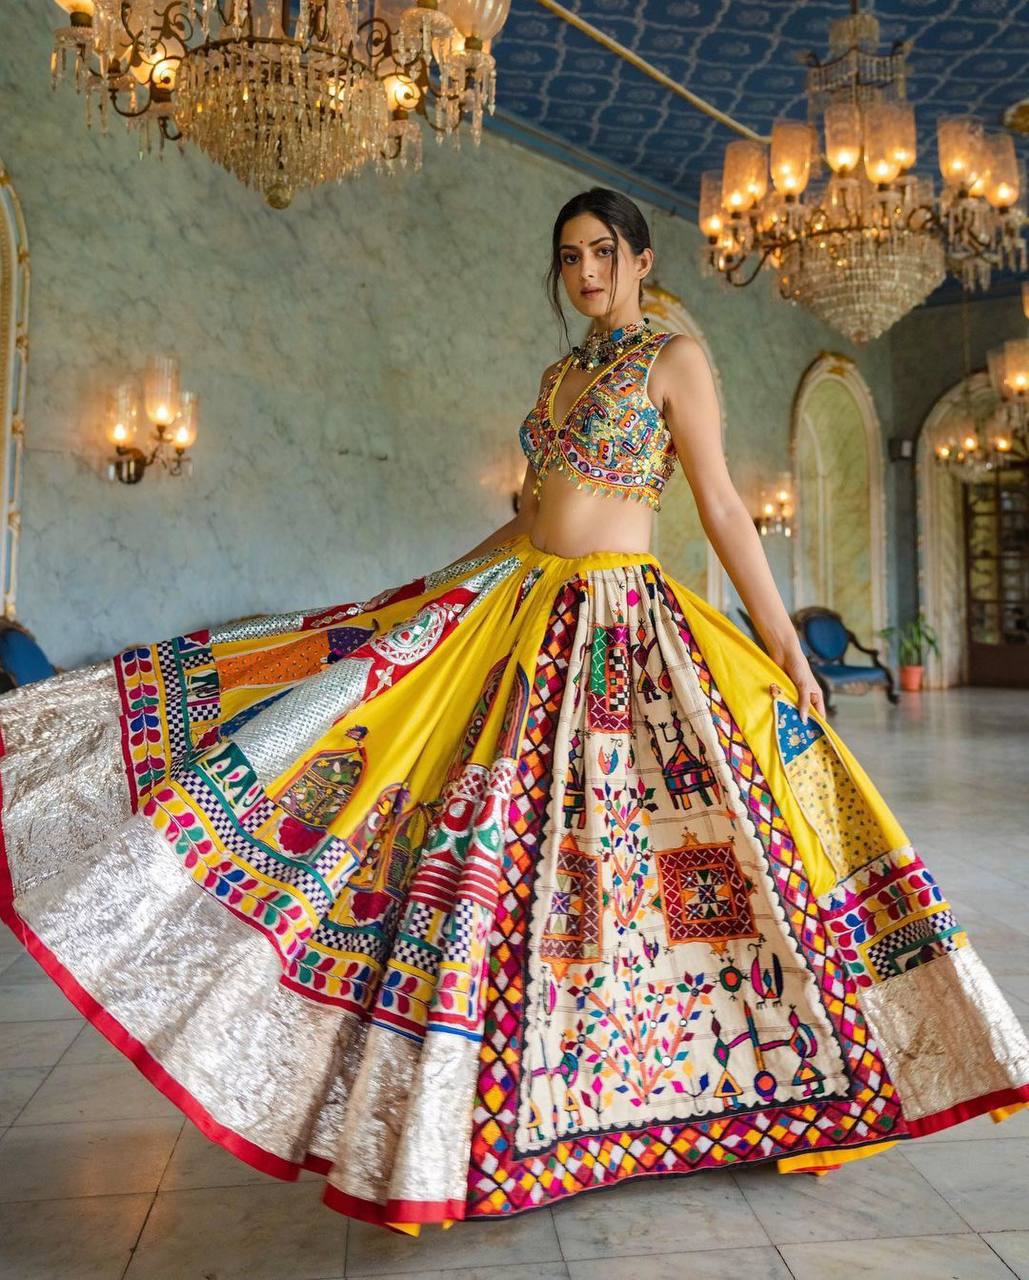 Classy Girls Wear Pearl - Indian Bridal Outfit